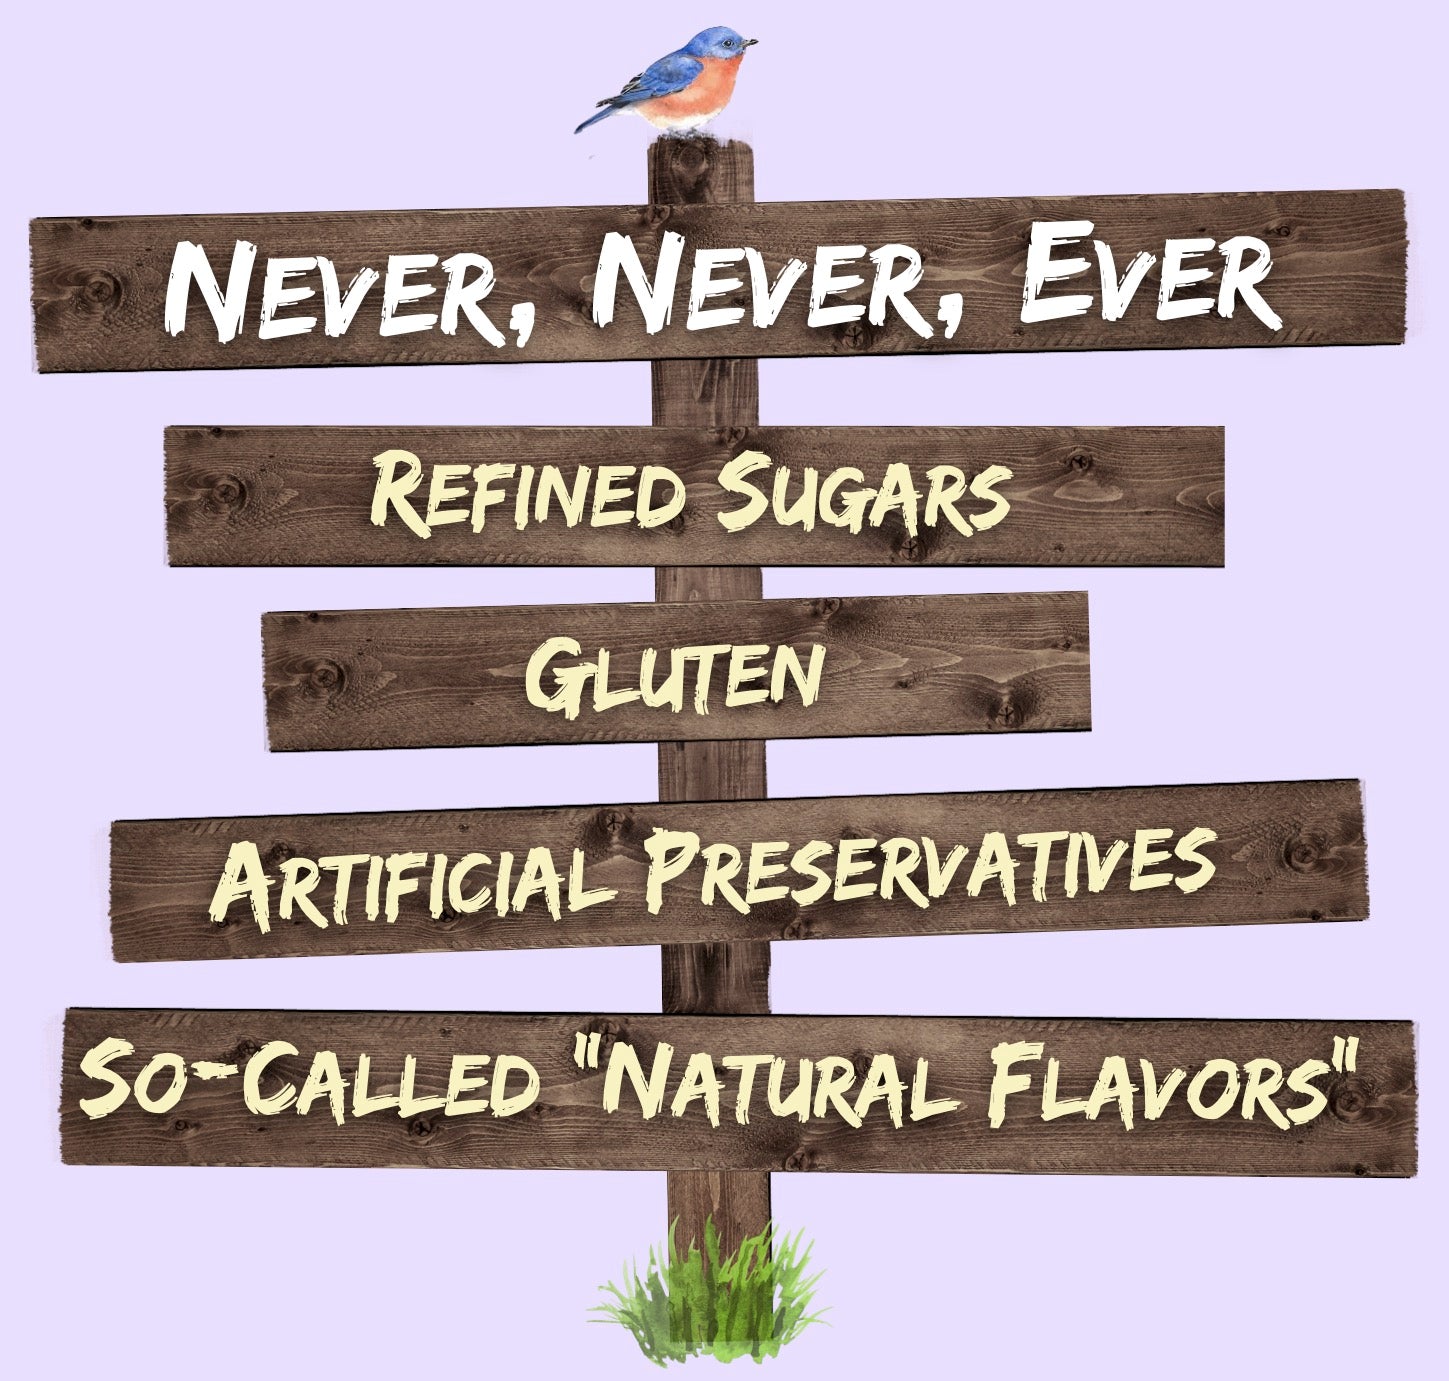 Wooden Signs saying "Never, Never, Ever: Refined Sugar, Gluten, Artificial Preservatives, or so-called "natural flavors"